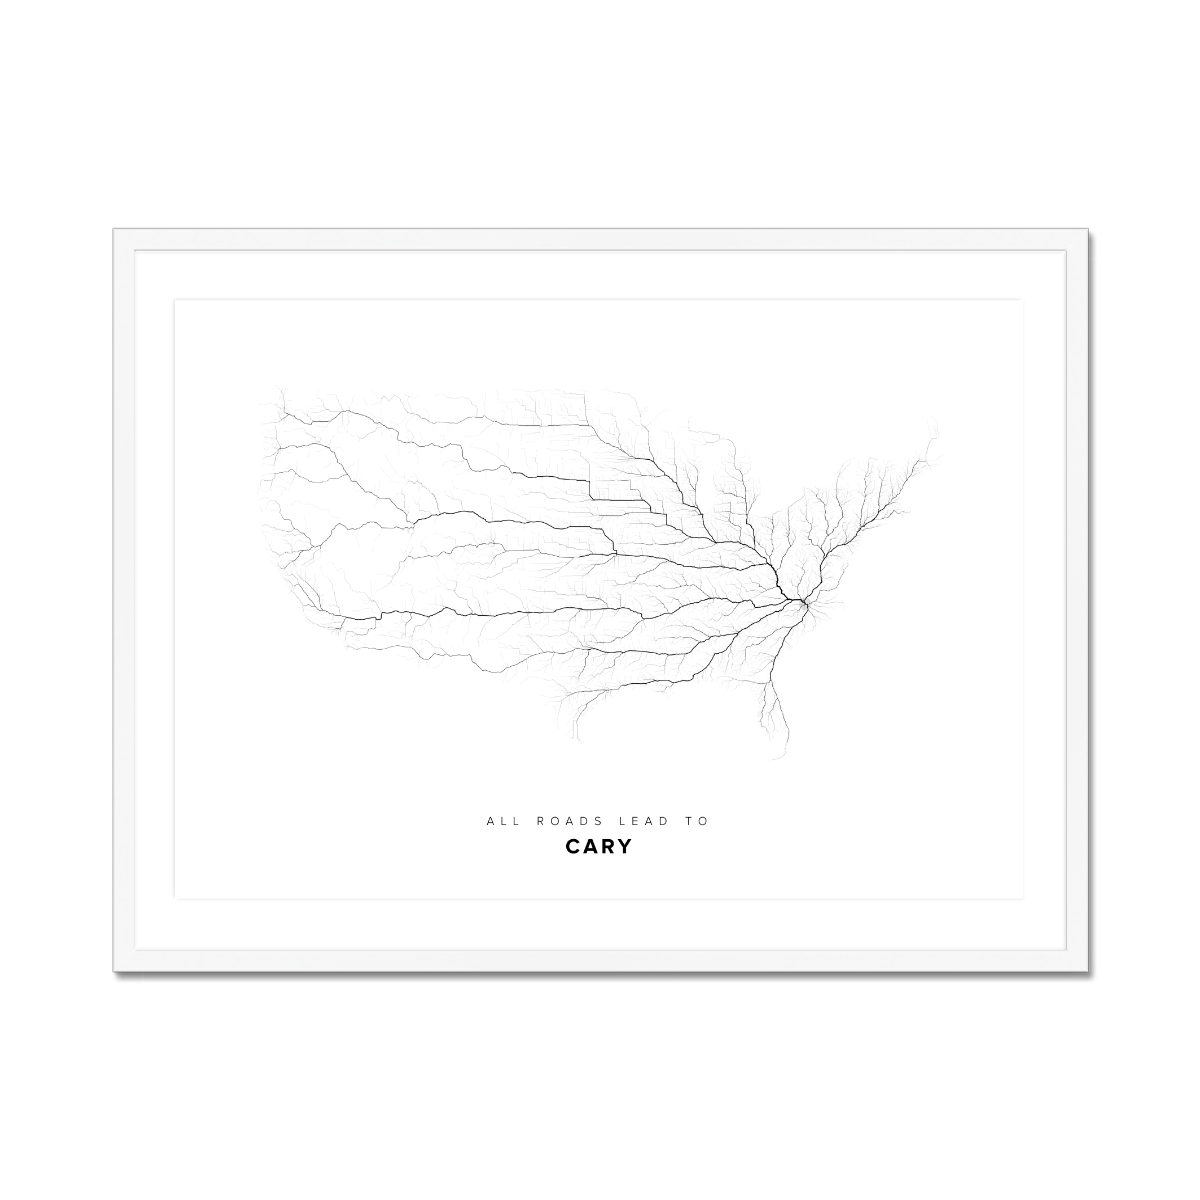 All roads lead to Cary (United States of America) Fine Art Map Print